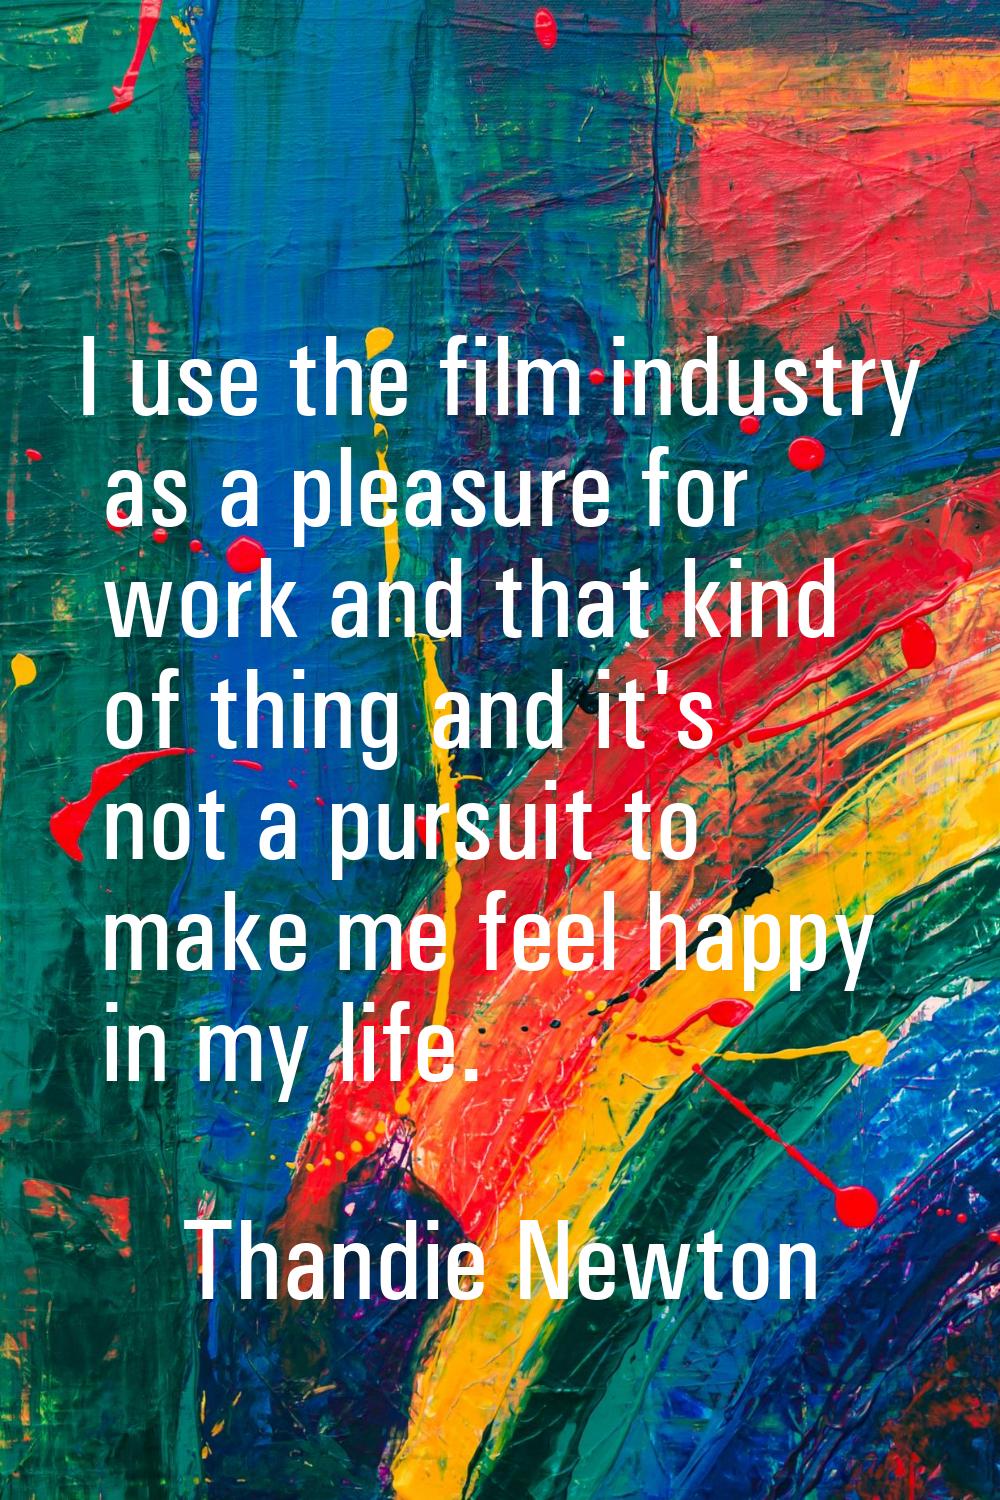 I use the film industry as a pleasure for work and that kind of thing and it's not a pursuit to mak